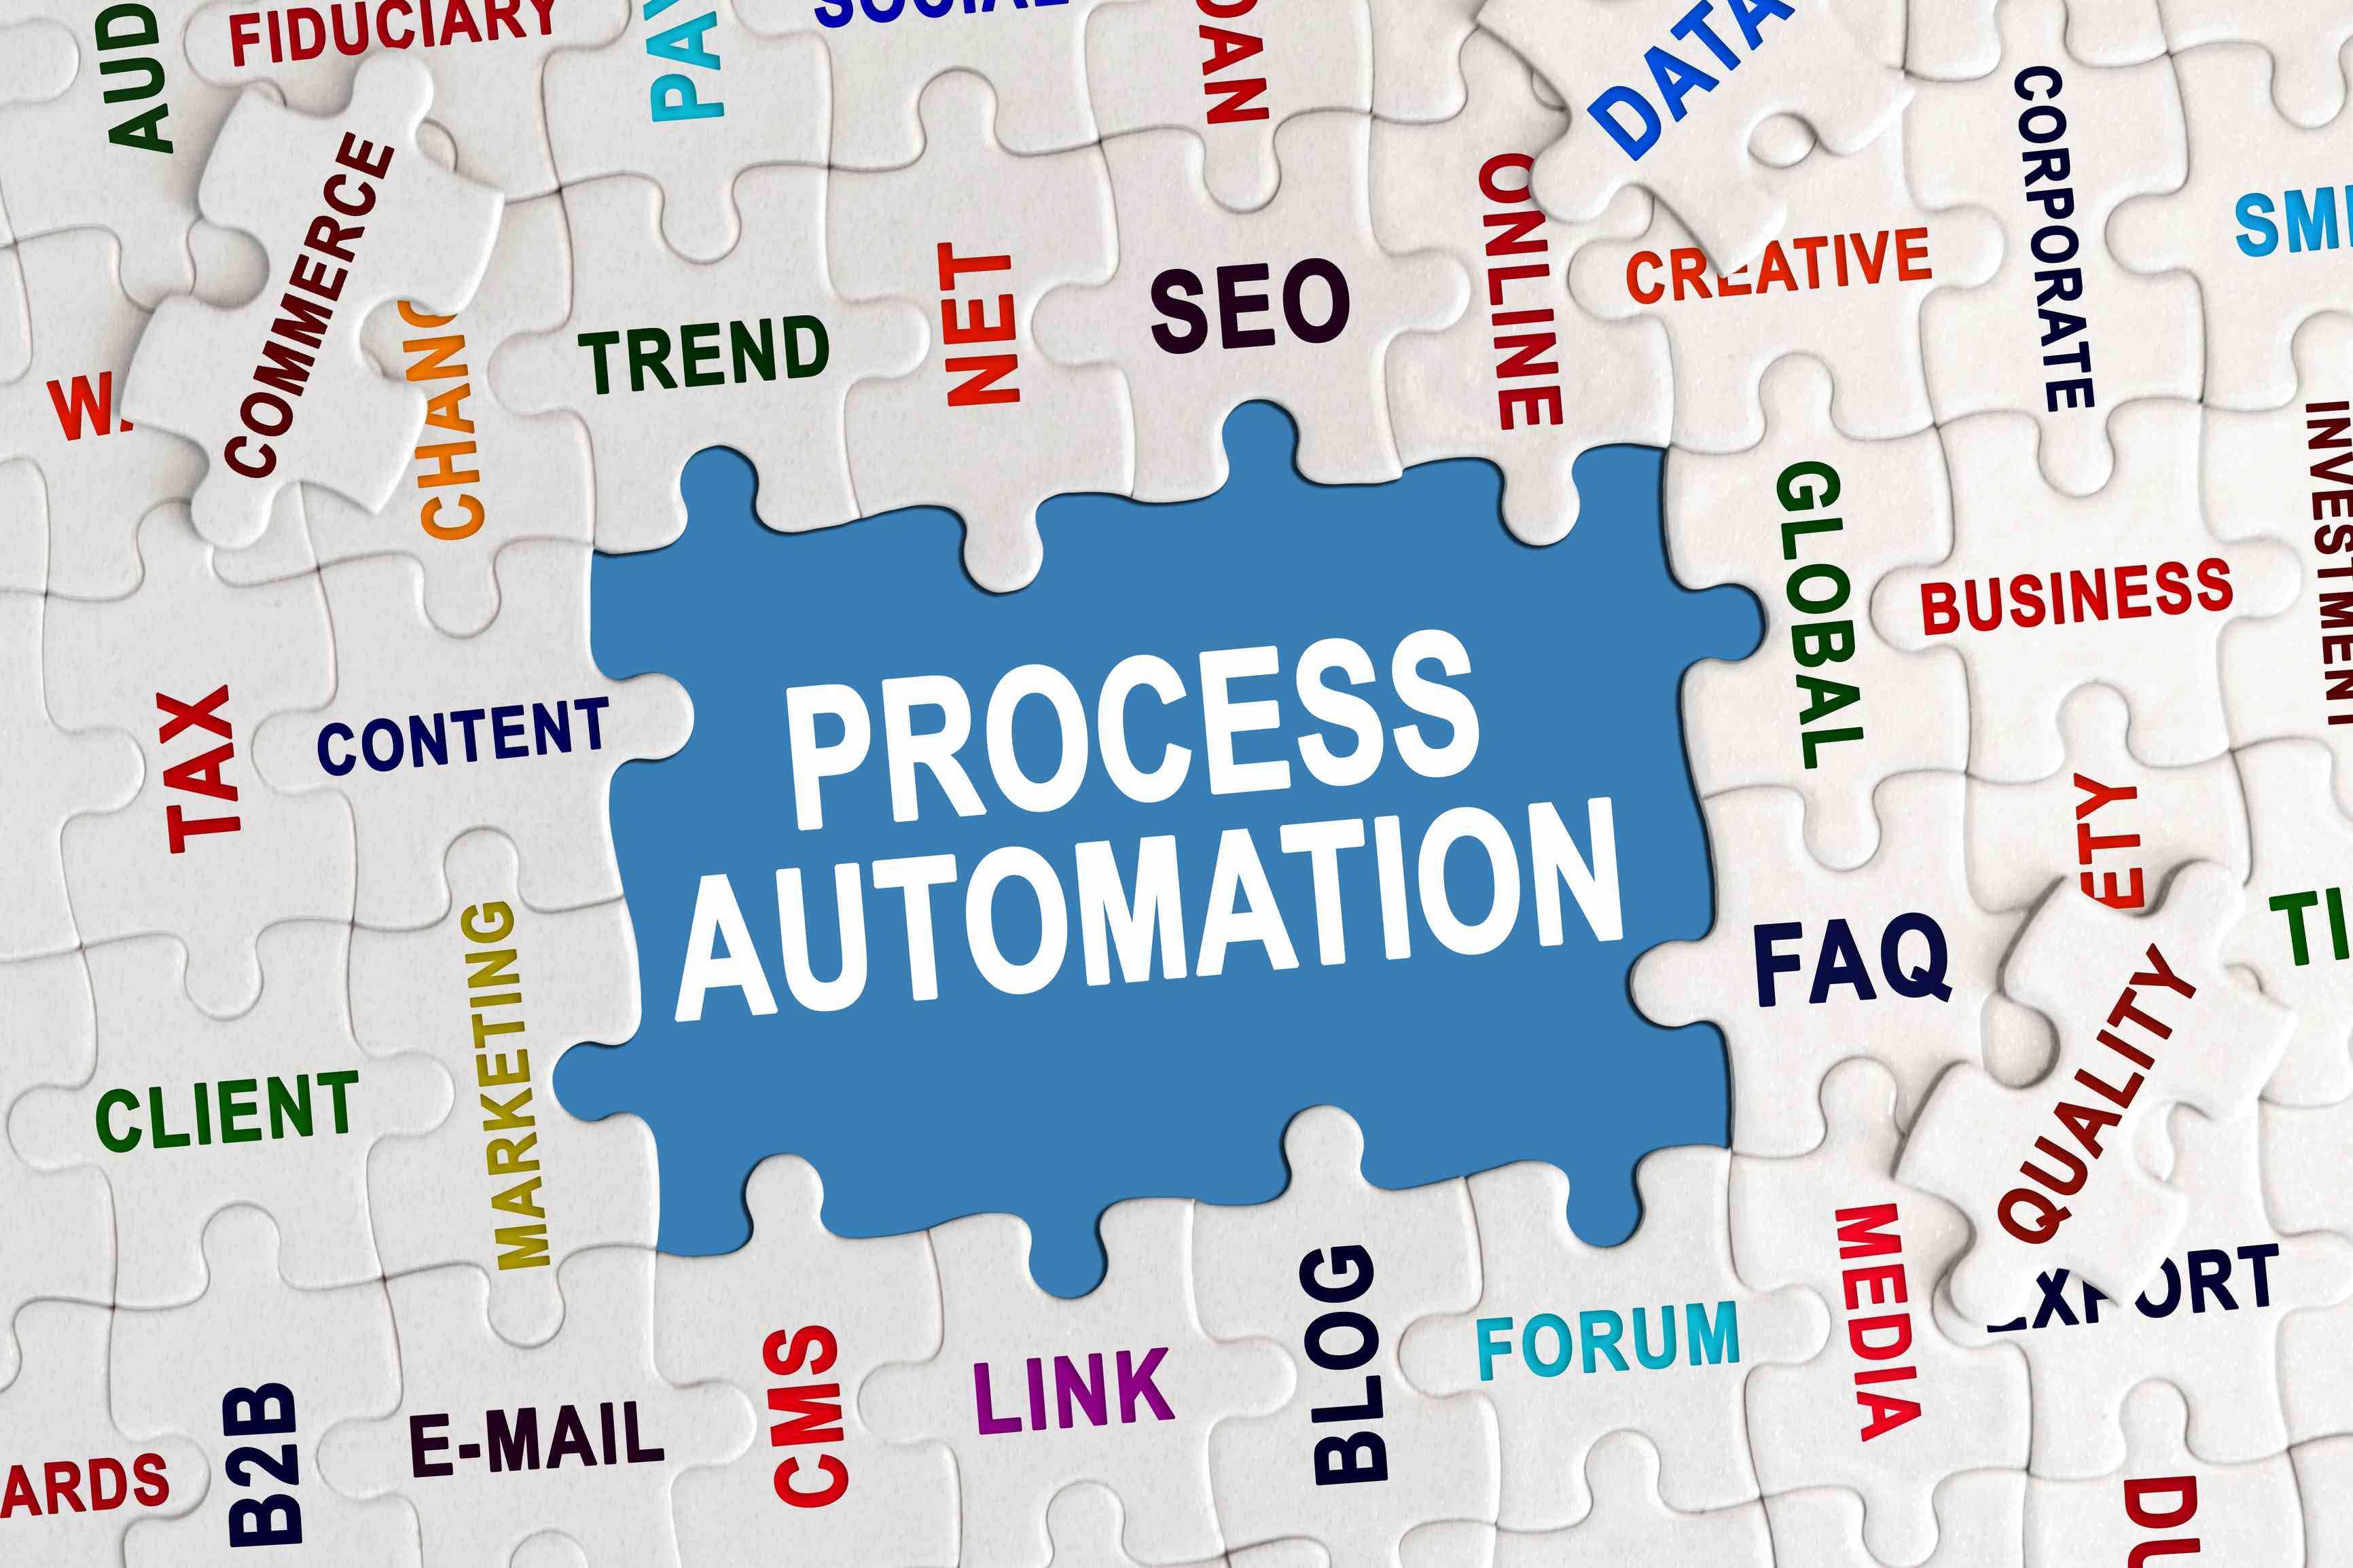 Process Automation in SMEs - What should be considered?